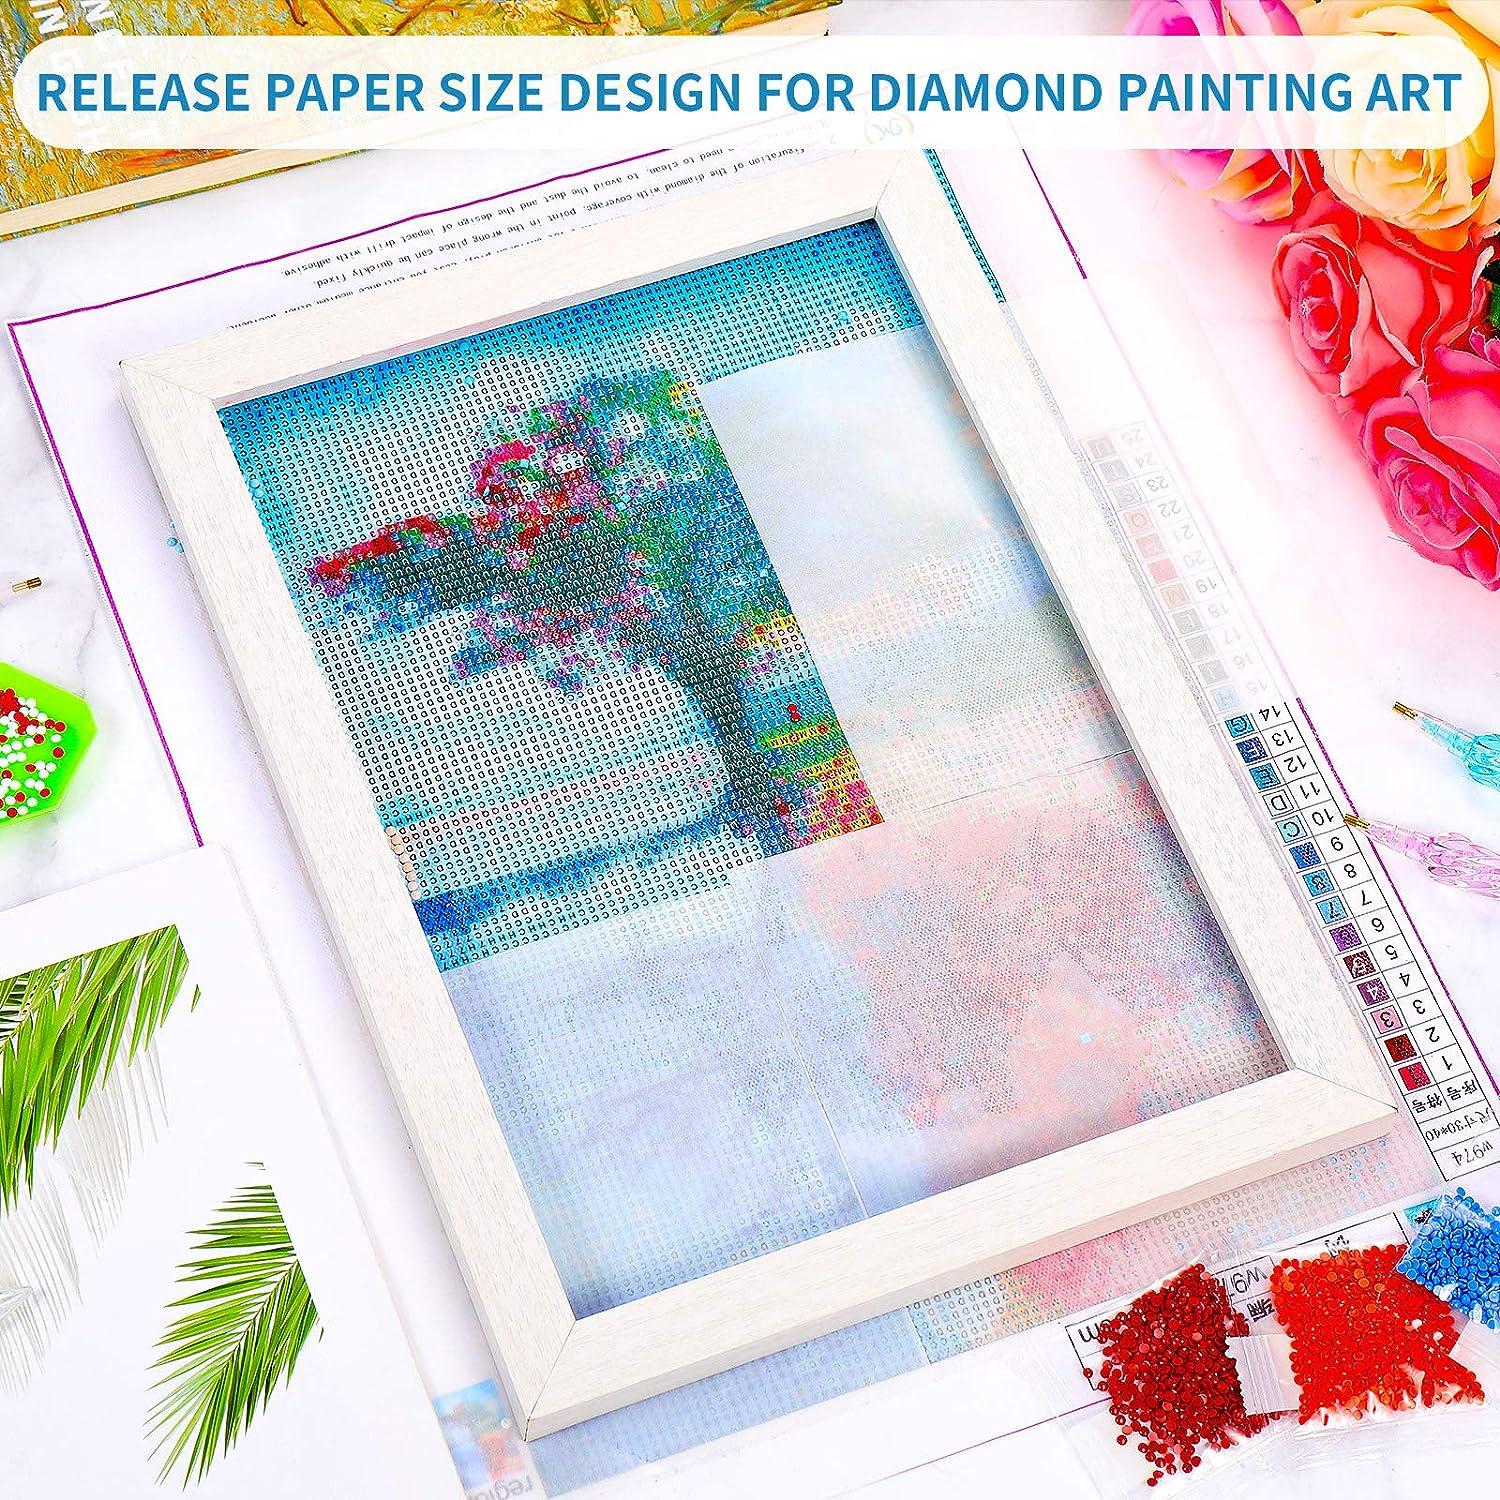 150 Sheets Diamond Painting Release Paper Double-Sided Release Paper  Non-Stick Diamond Painting Cover Paper with 2 Pieces Diamond Painting Fix  Tools for Diamond Embroidery Accessories 5.9 x 3.9 Inch